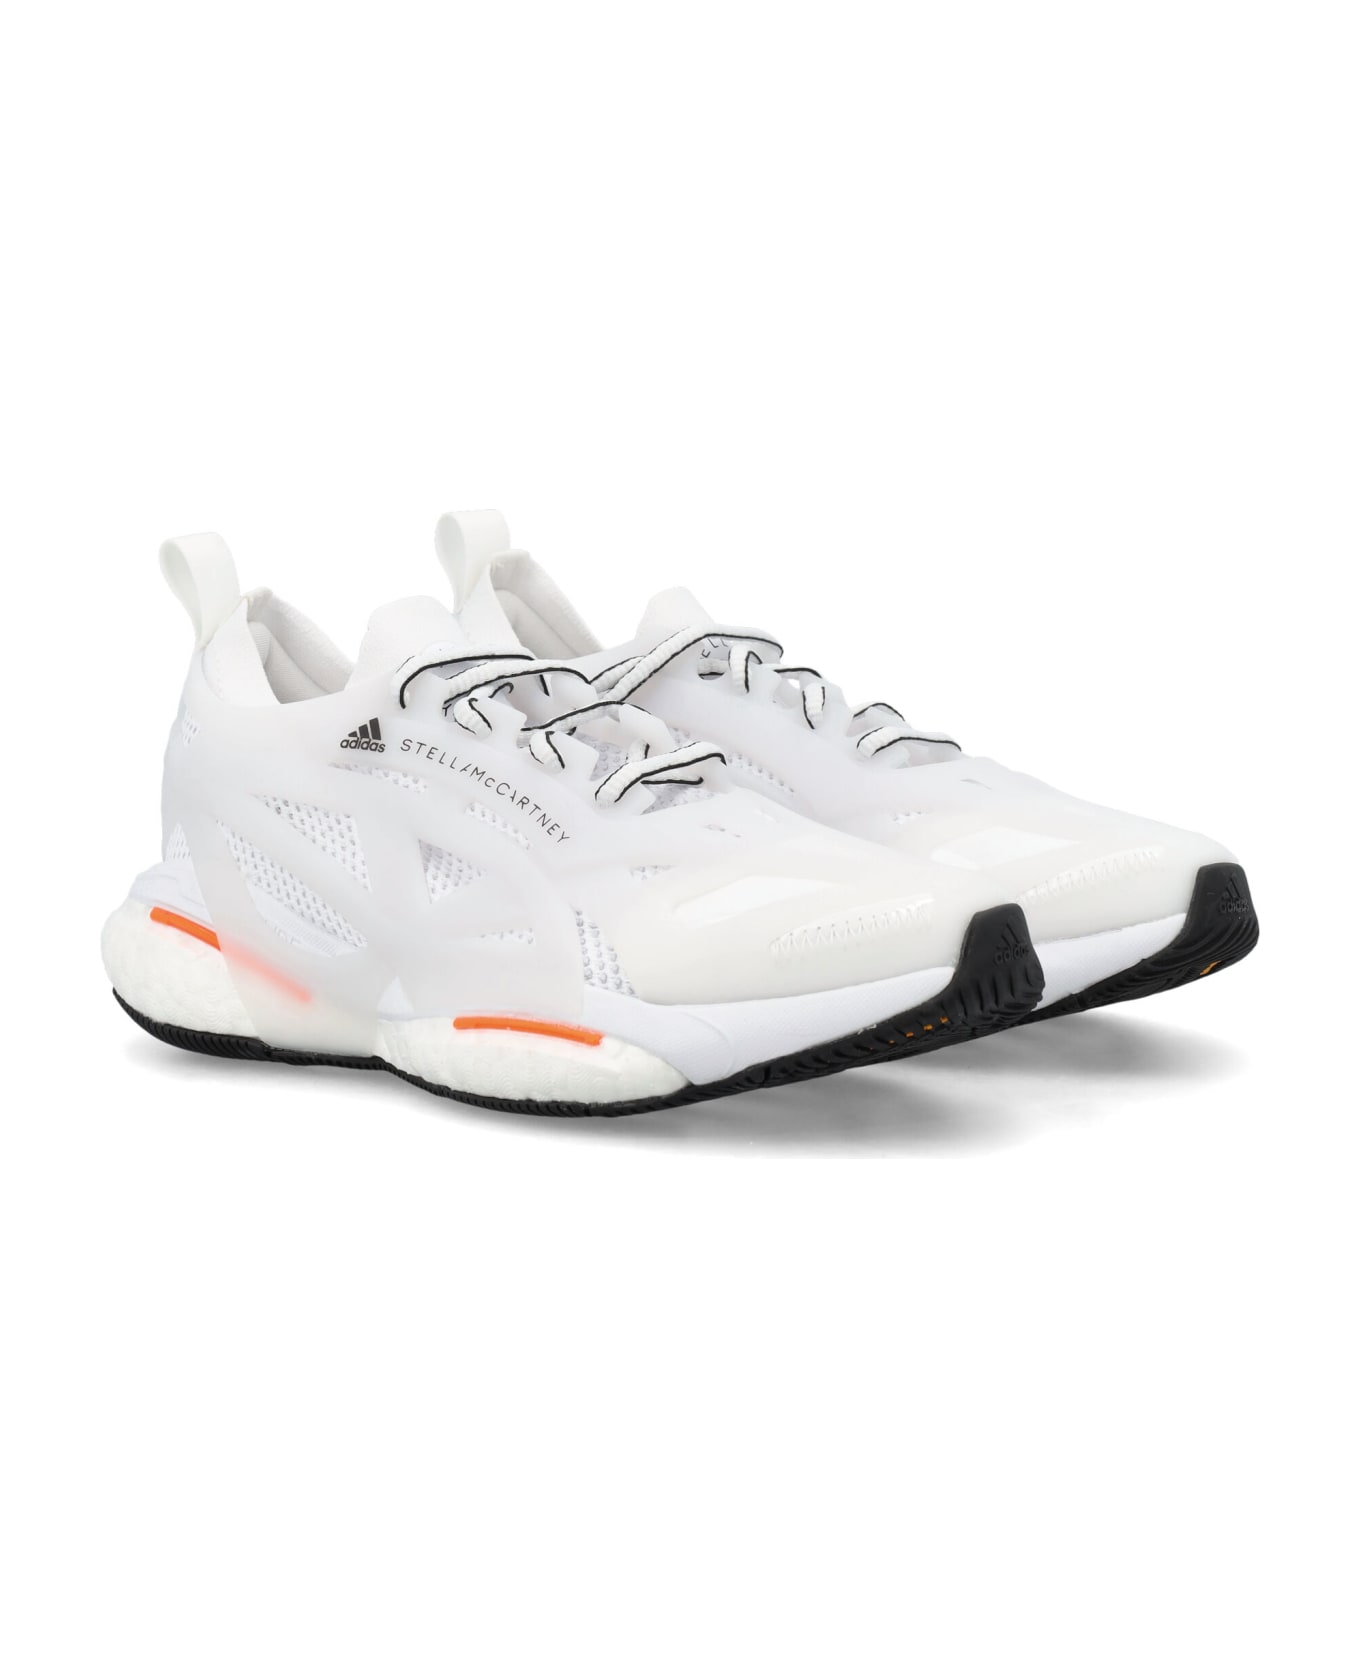 Adidas by Stella McCartney Solarglide Low-top Sneakers - WHITE